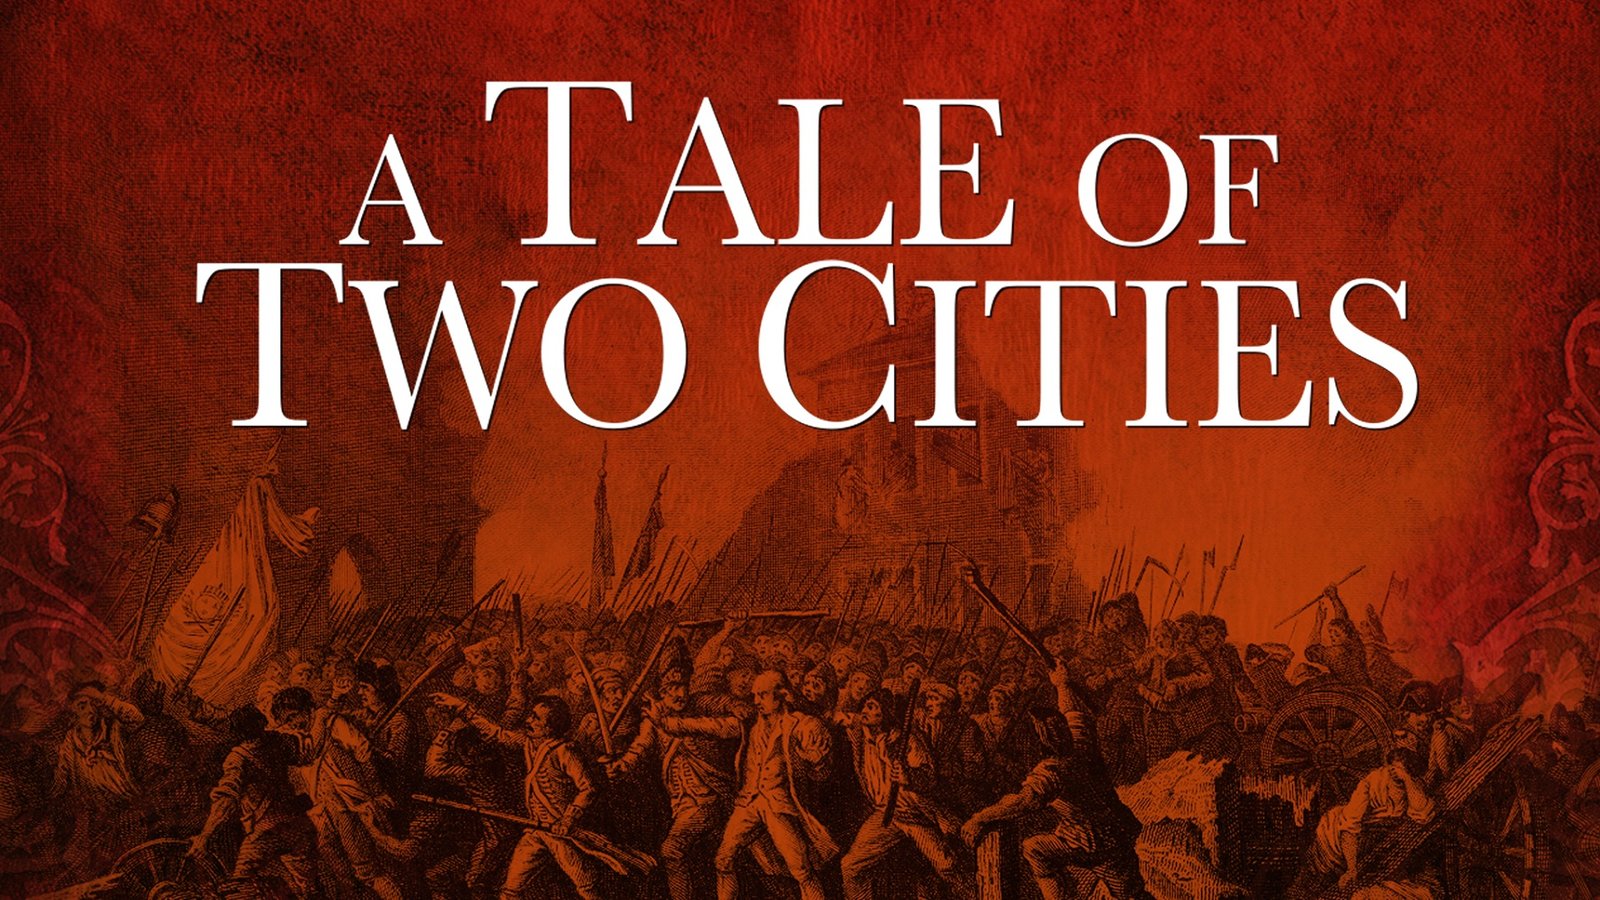 tale of two cities movie free download